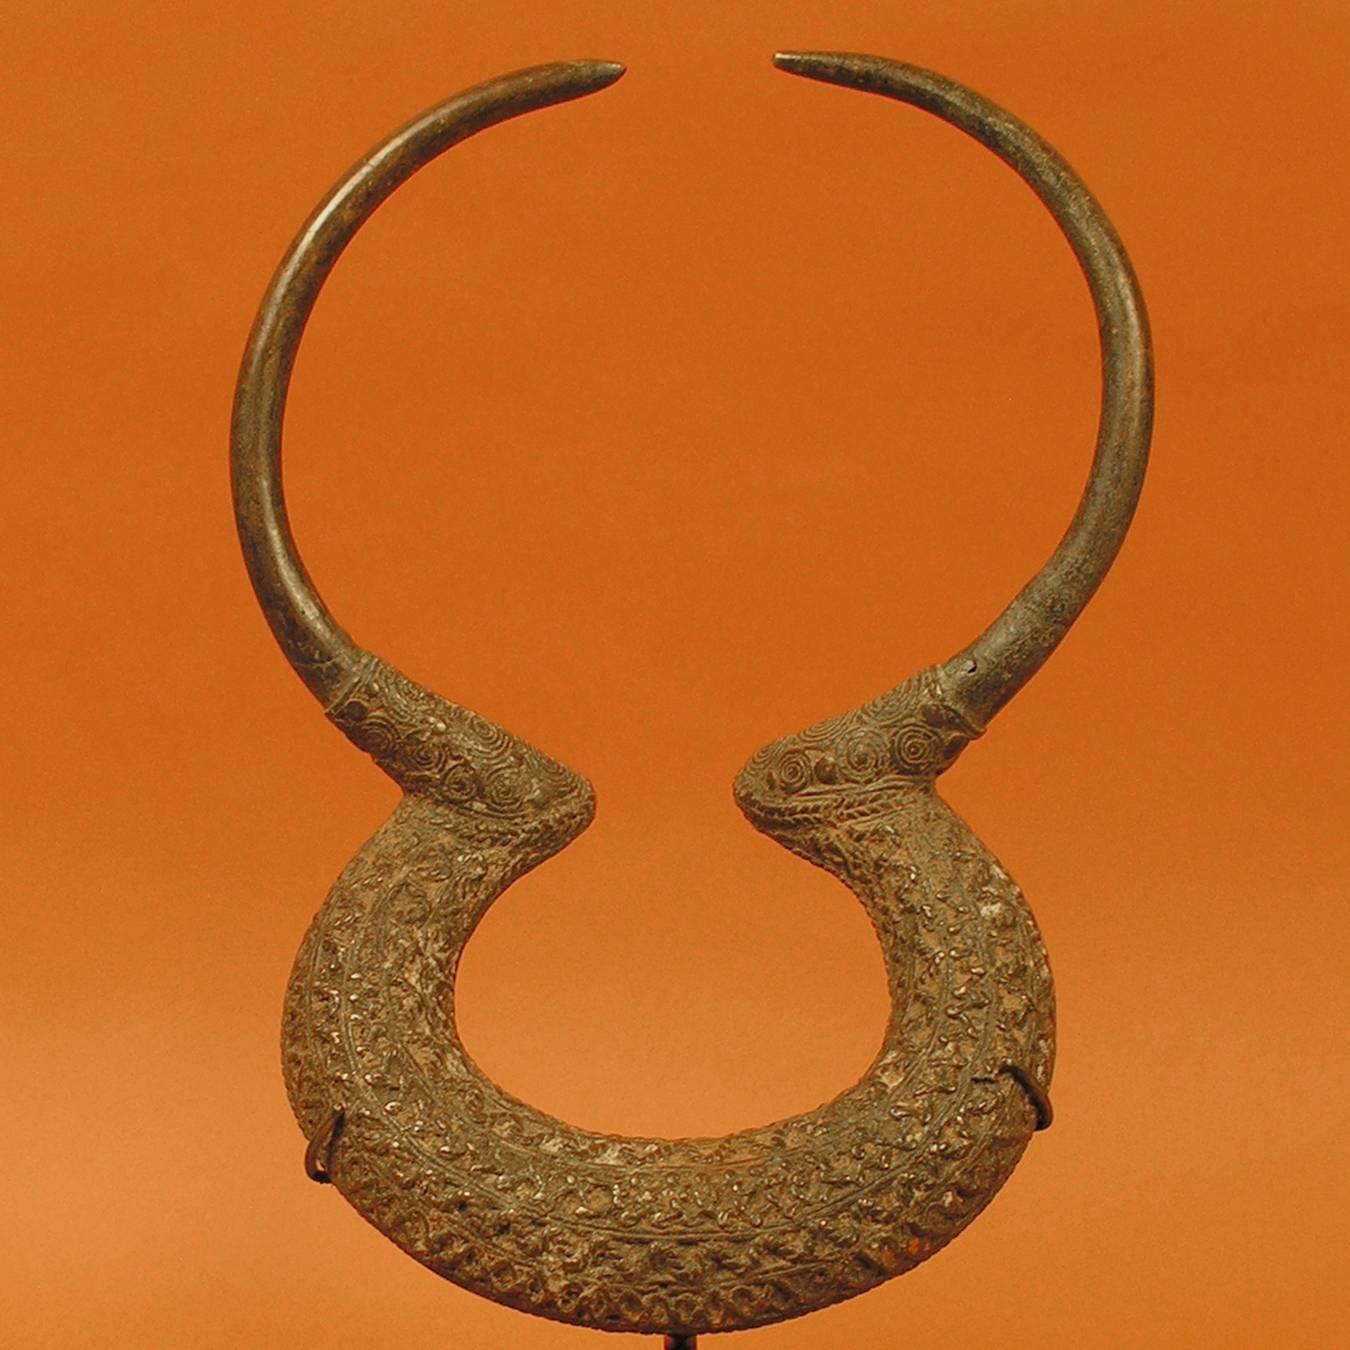 20th century armband currency, Kenga culture, Chad, Africa

The artistry of this man's armband creates an elegant zoomorphic form reminiscent of buffalo horns. The level of detail in the casting reflects the importance it held as a currency. A man